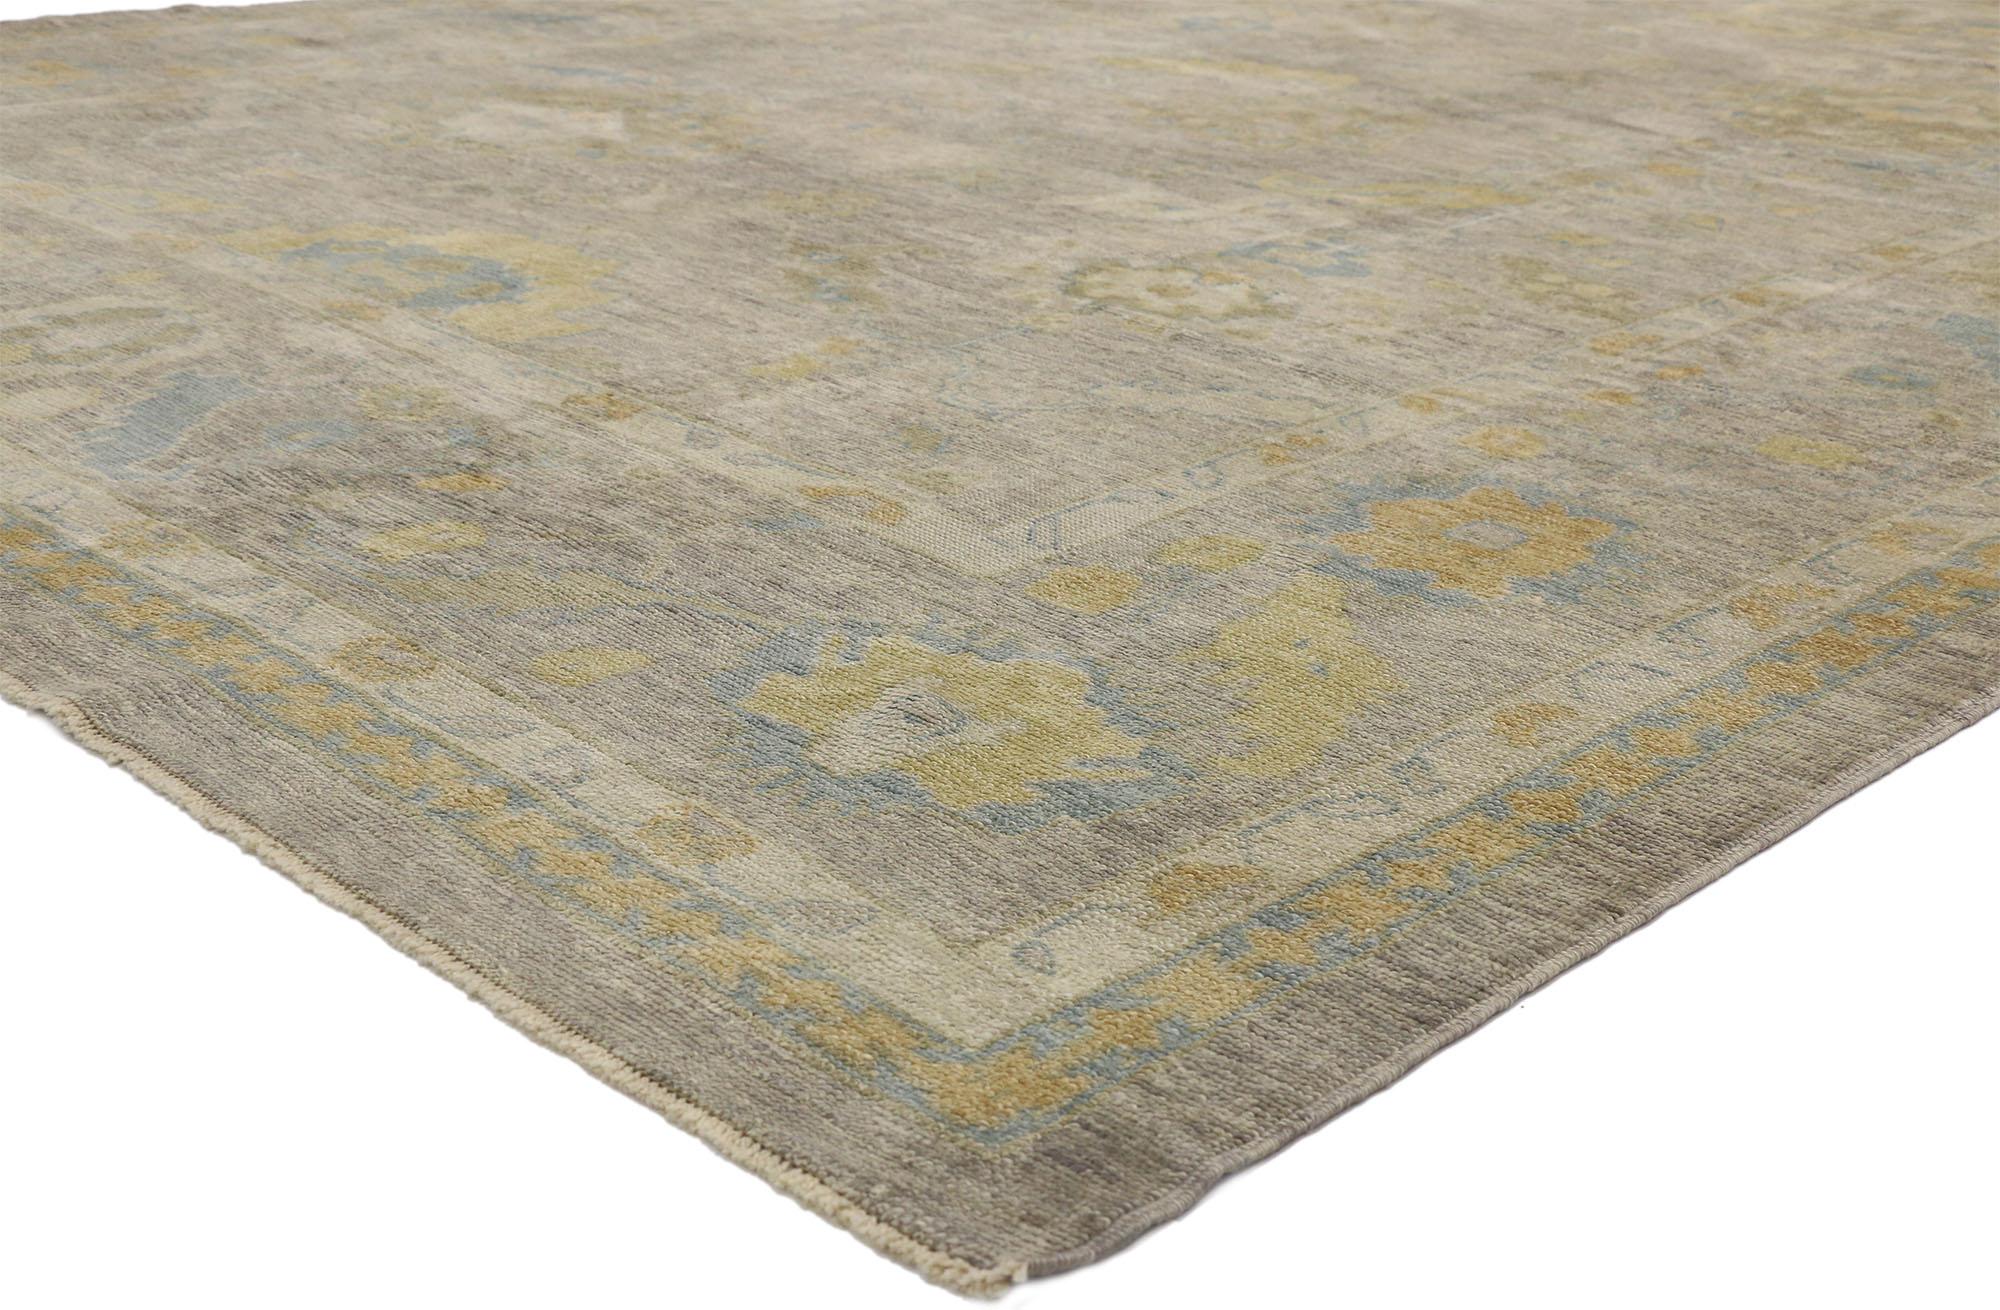 52491, new contemporary Turkish Oushak rug with transitional style. This hand knotted wool contemporary Turkish Oushak area rug features an all-over large scale geometric pattern composed of Harshang-style motifs, blooming palmettes, leafy tendrils,